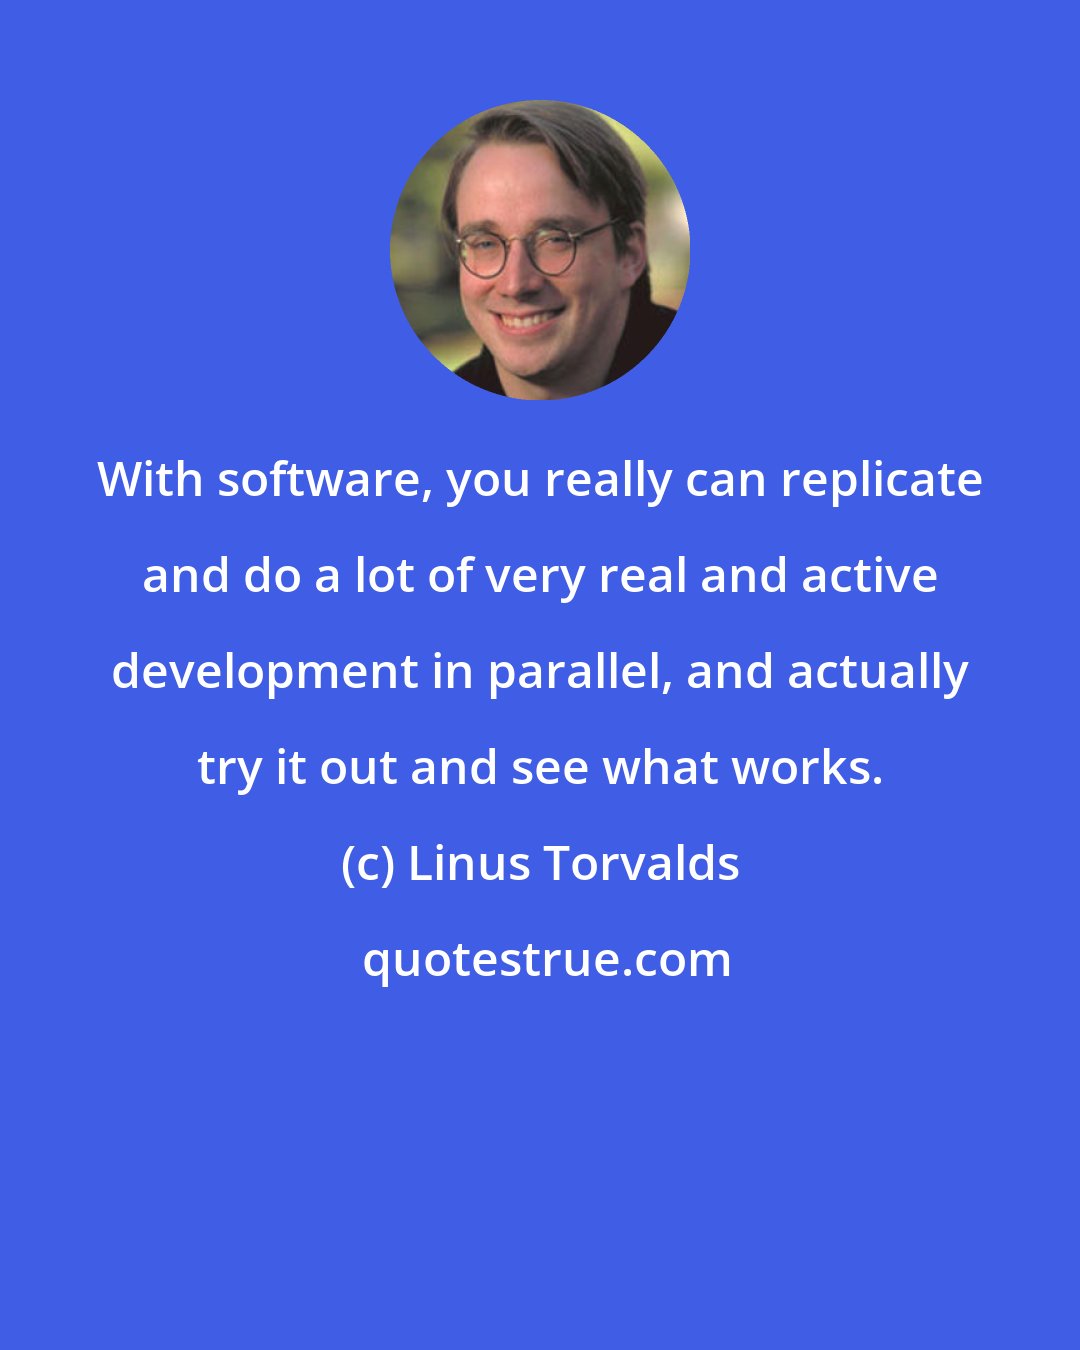 Linus Torvalds: With software, you really can replicate and do a lot of very real and active development in parallel, and actually try it out and see what works.